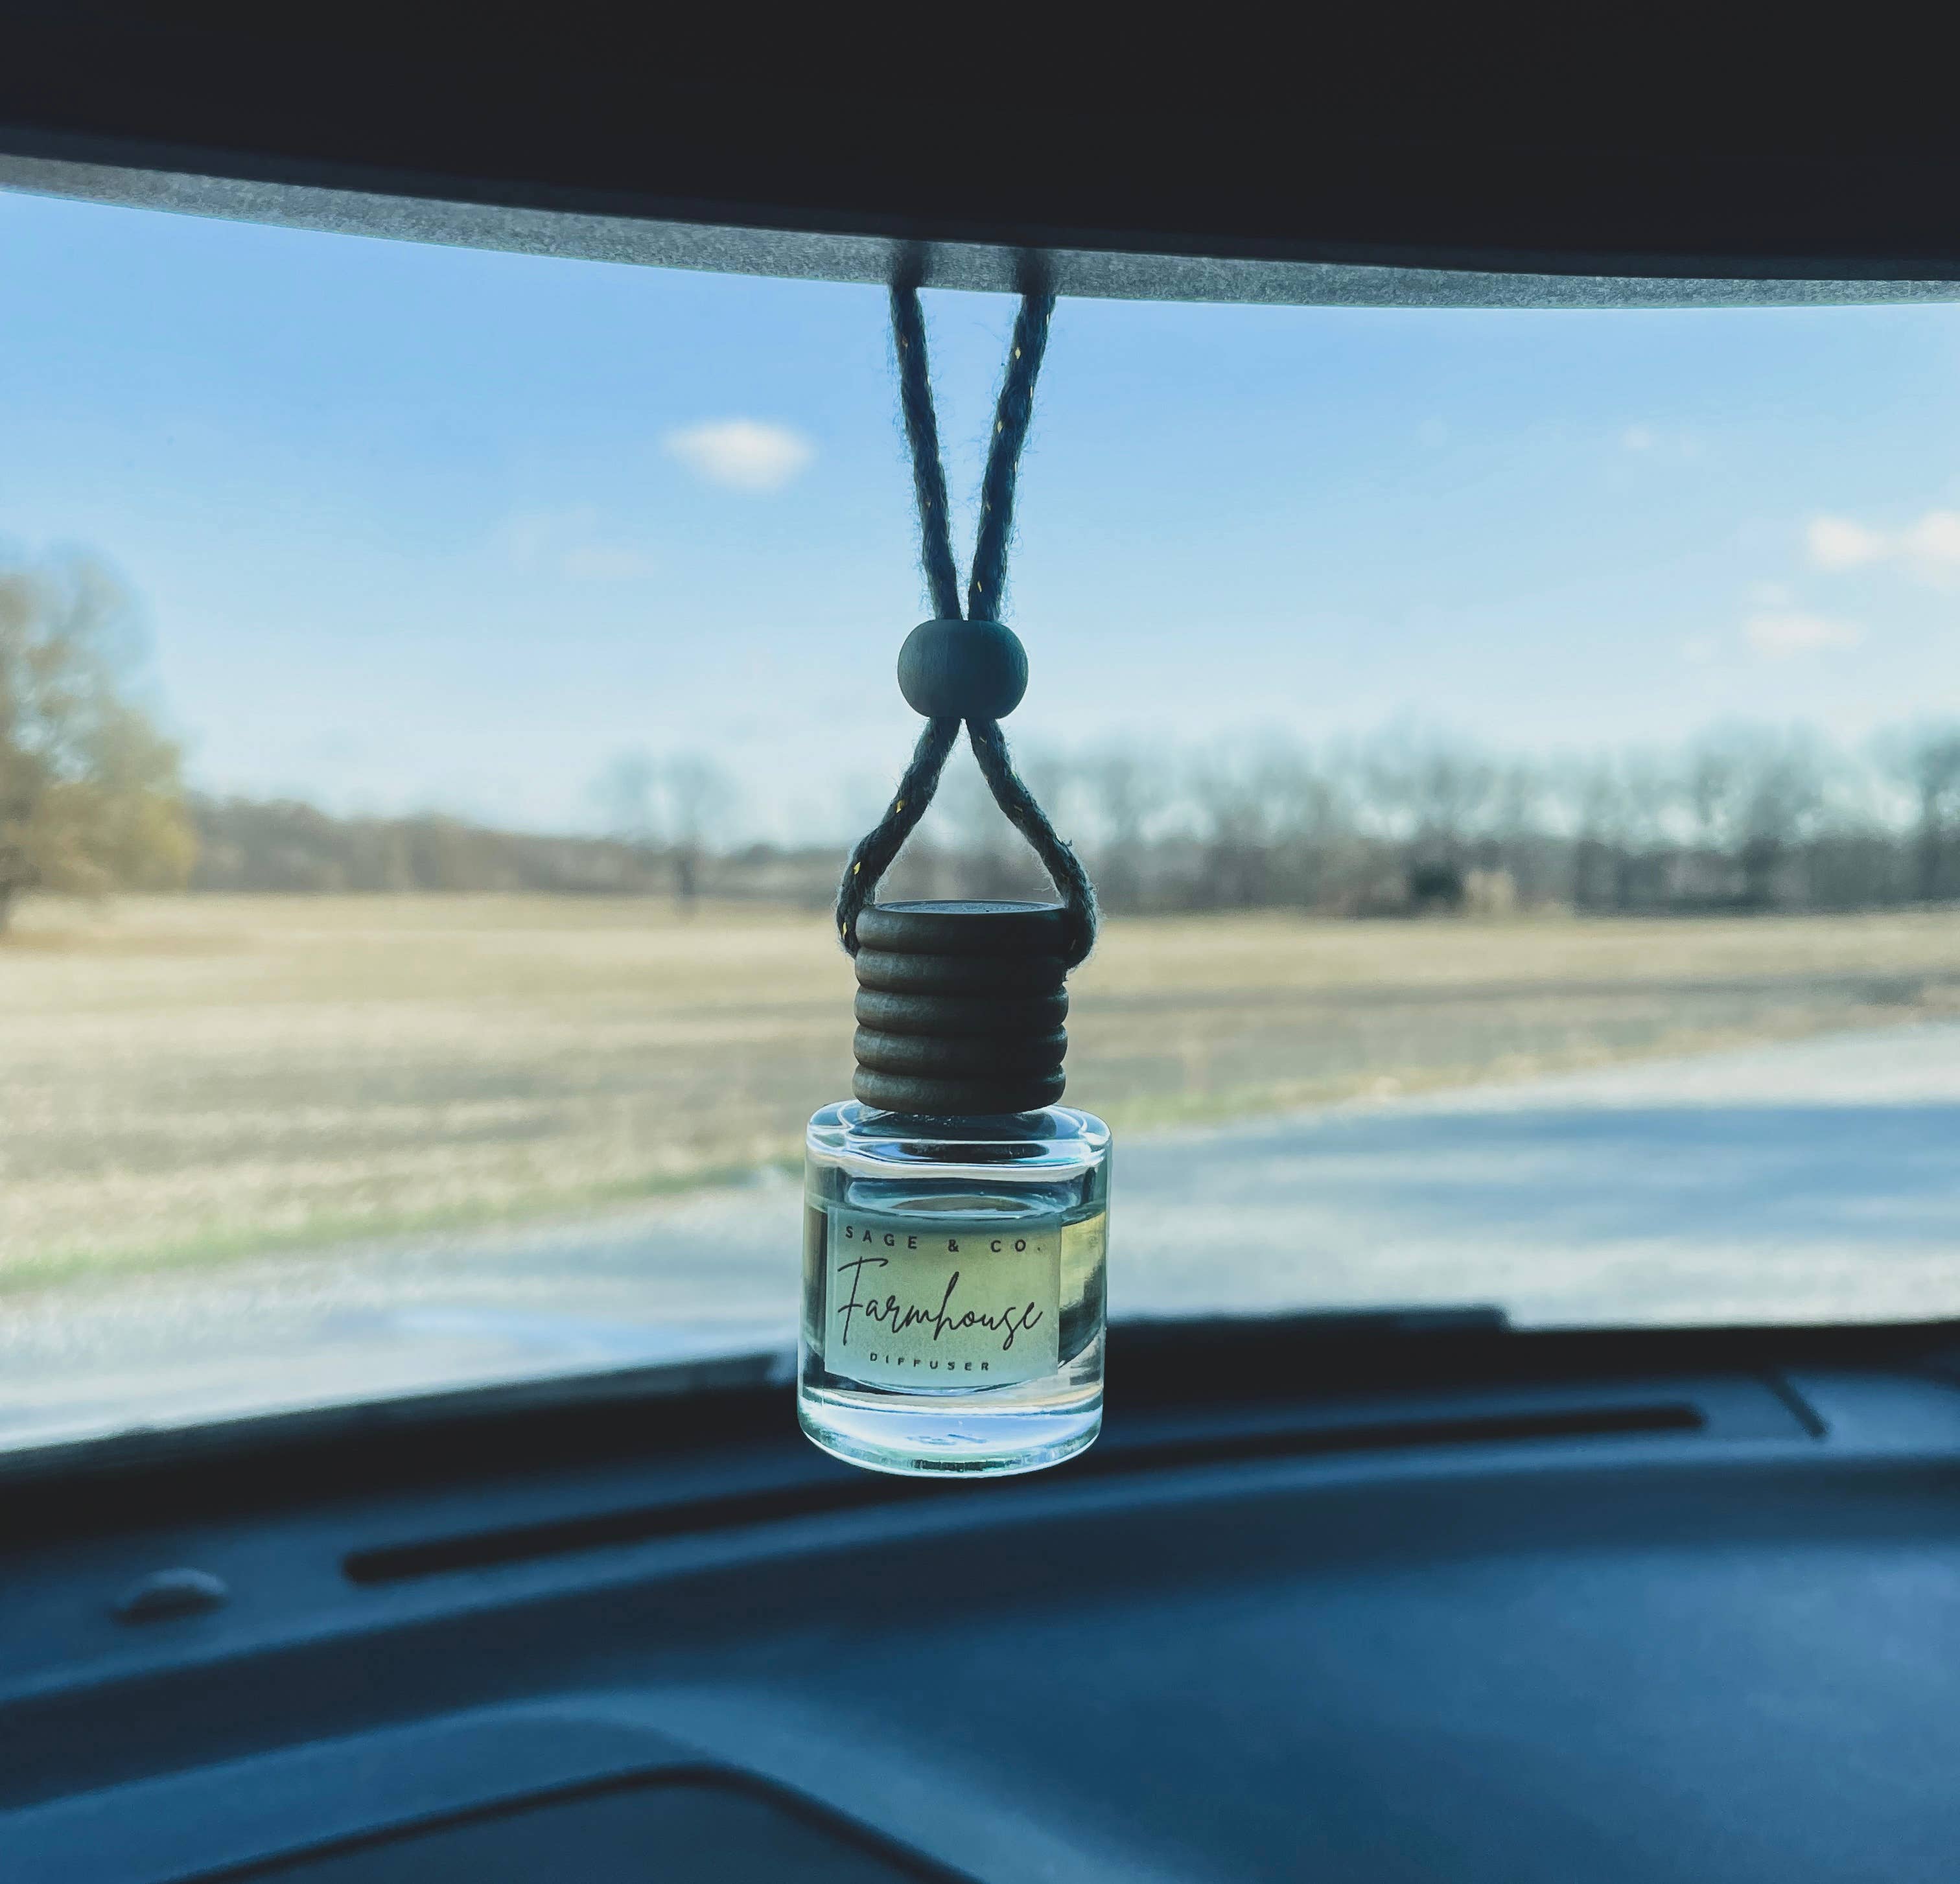 Brighter Sky Car Air Freshener with fragrance oil refil, French Vanilla  Scented, Cloud Shaped Car Aromatherapy Diffuser, Air Conditioning  Decoration